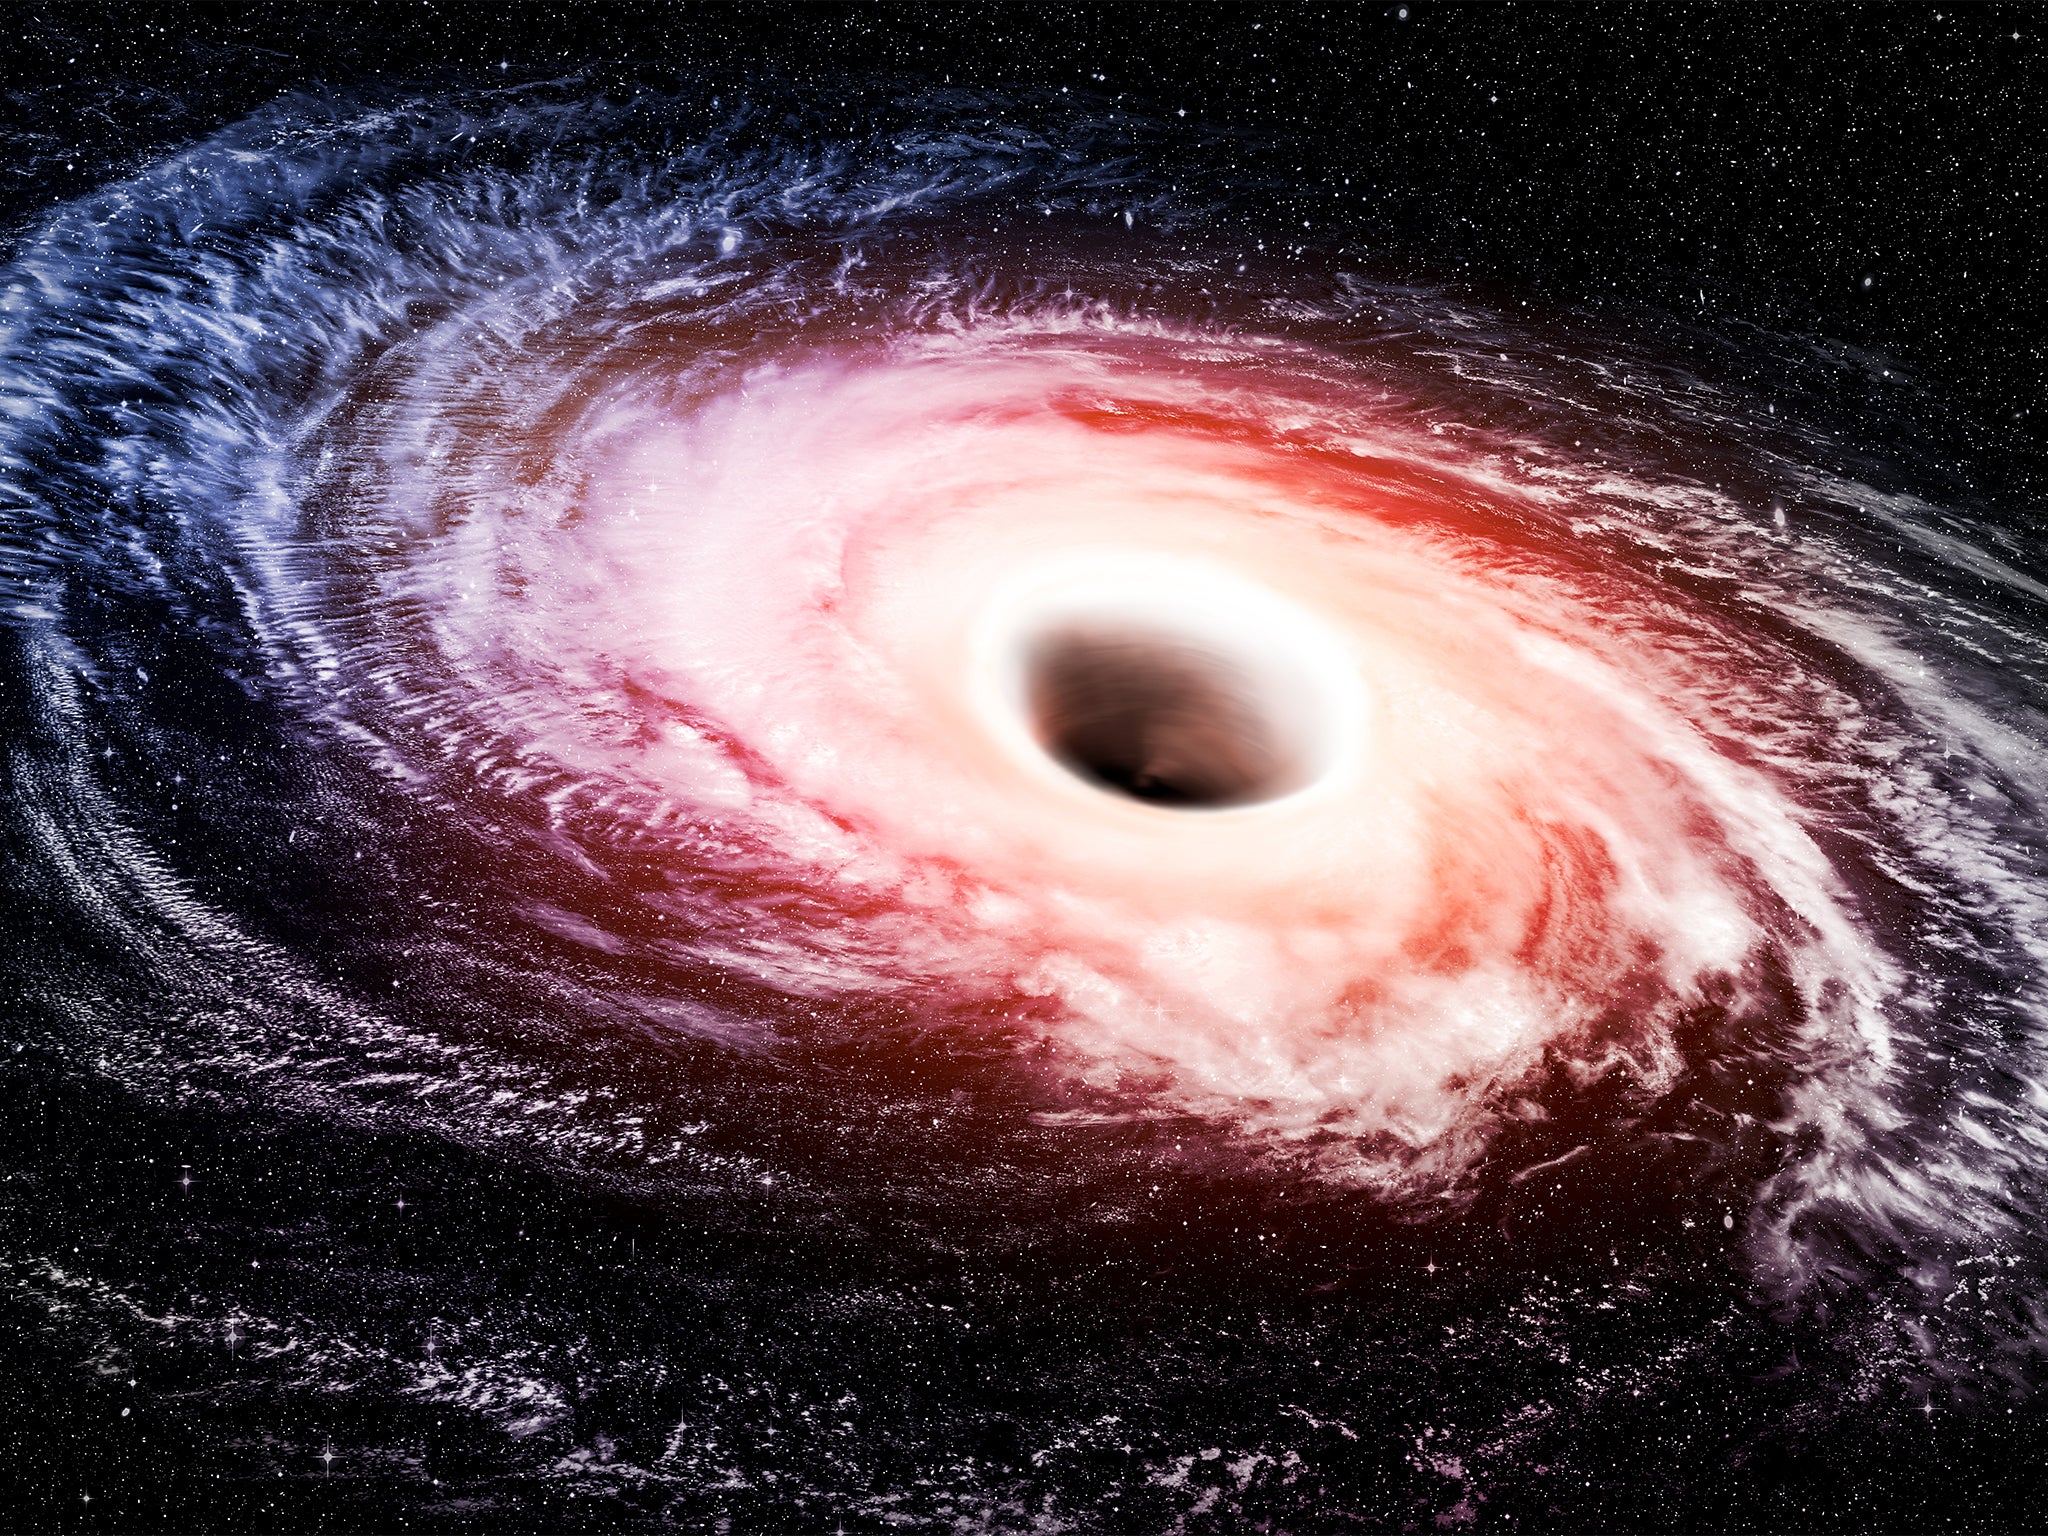 black hole in space